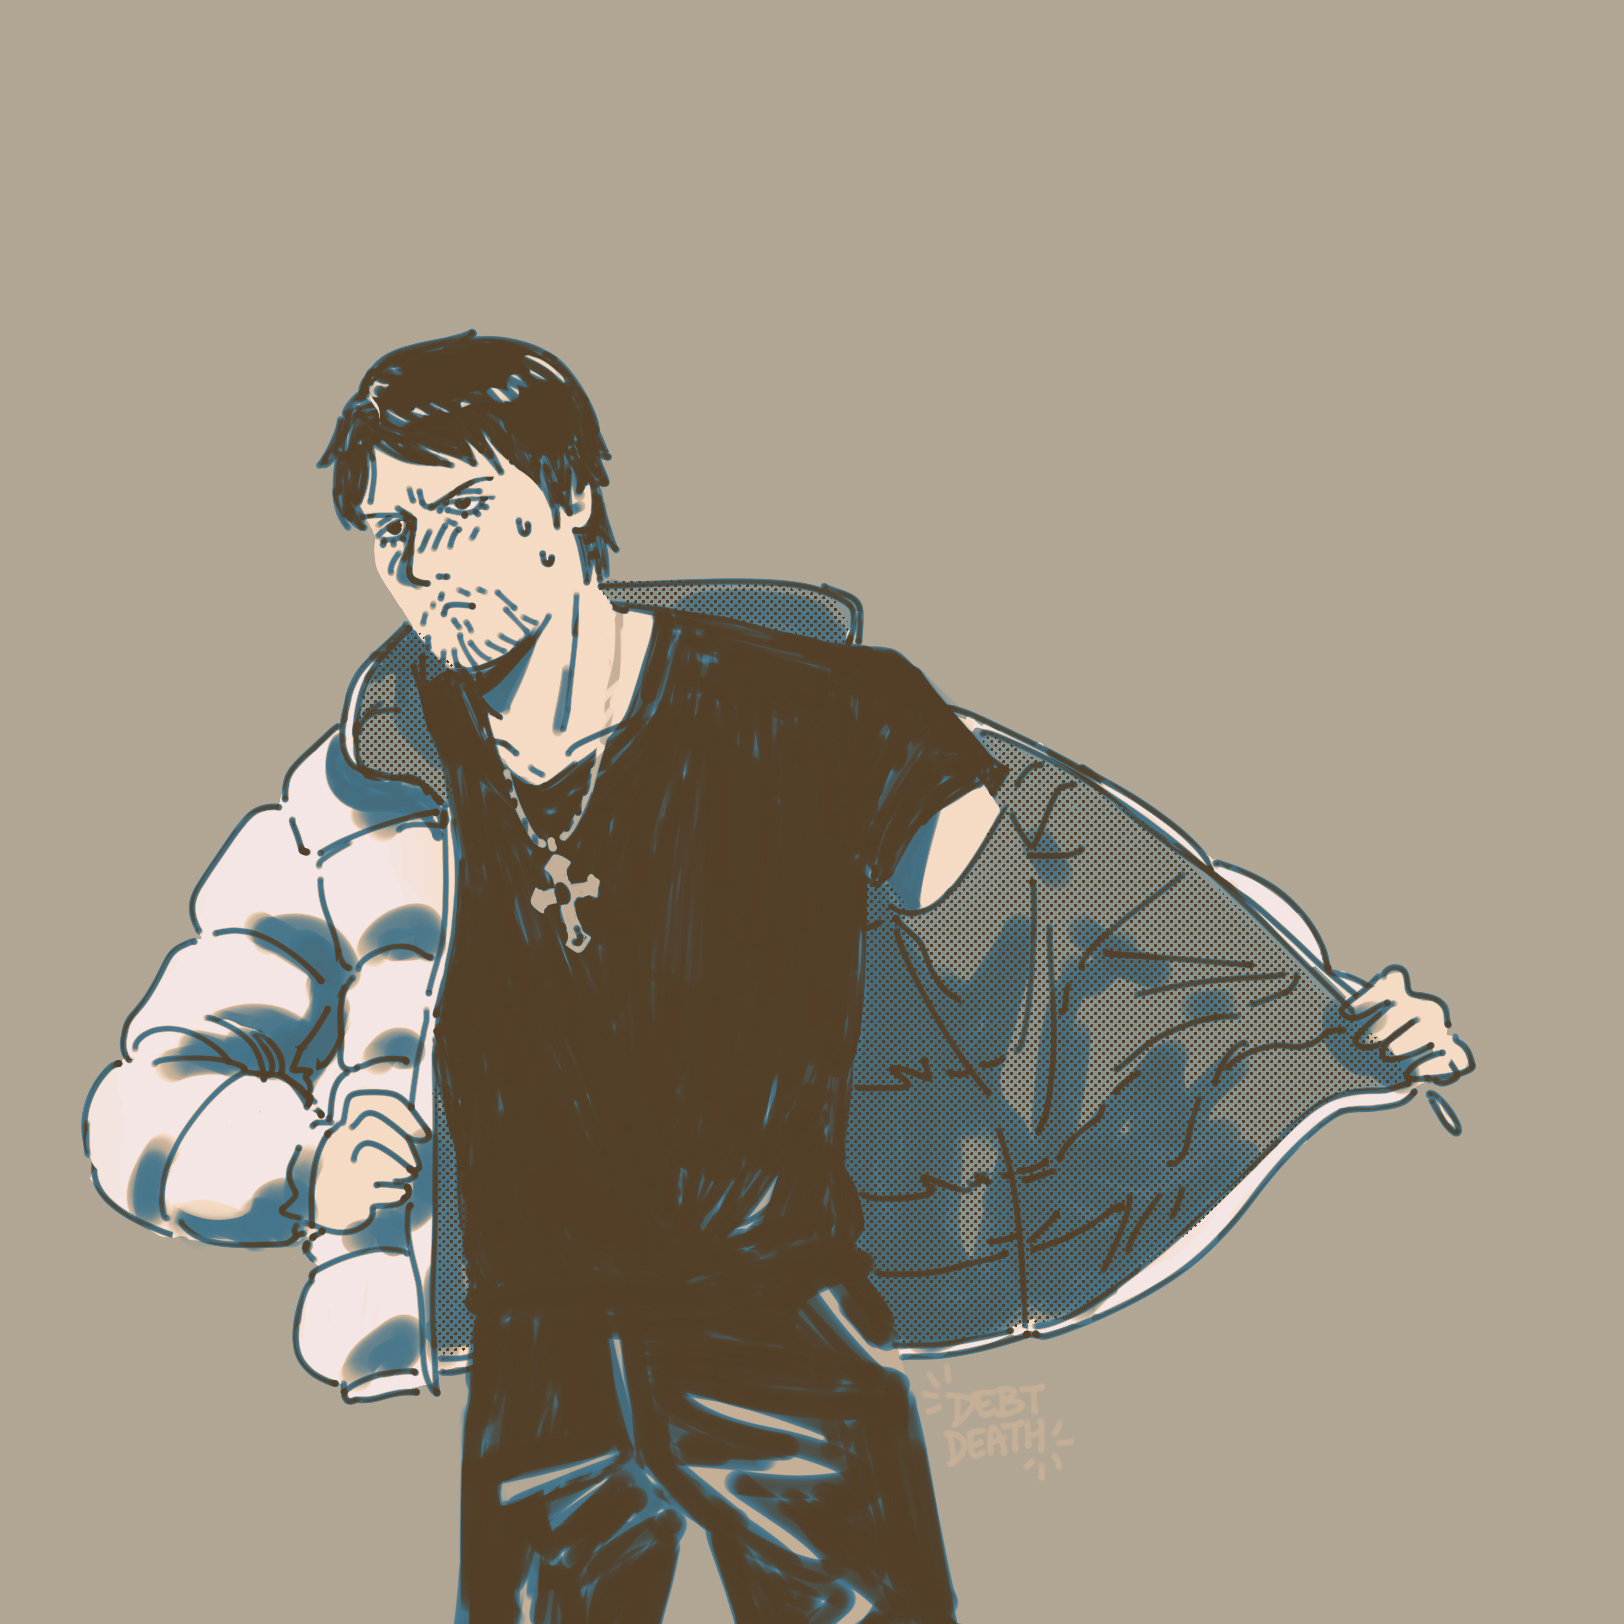 A drawing of Daigo Dojima in his signature white puffer jacket, drunk and grumpy